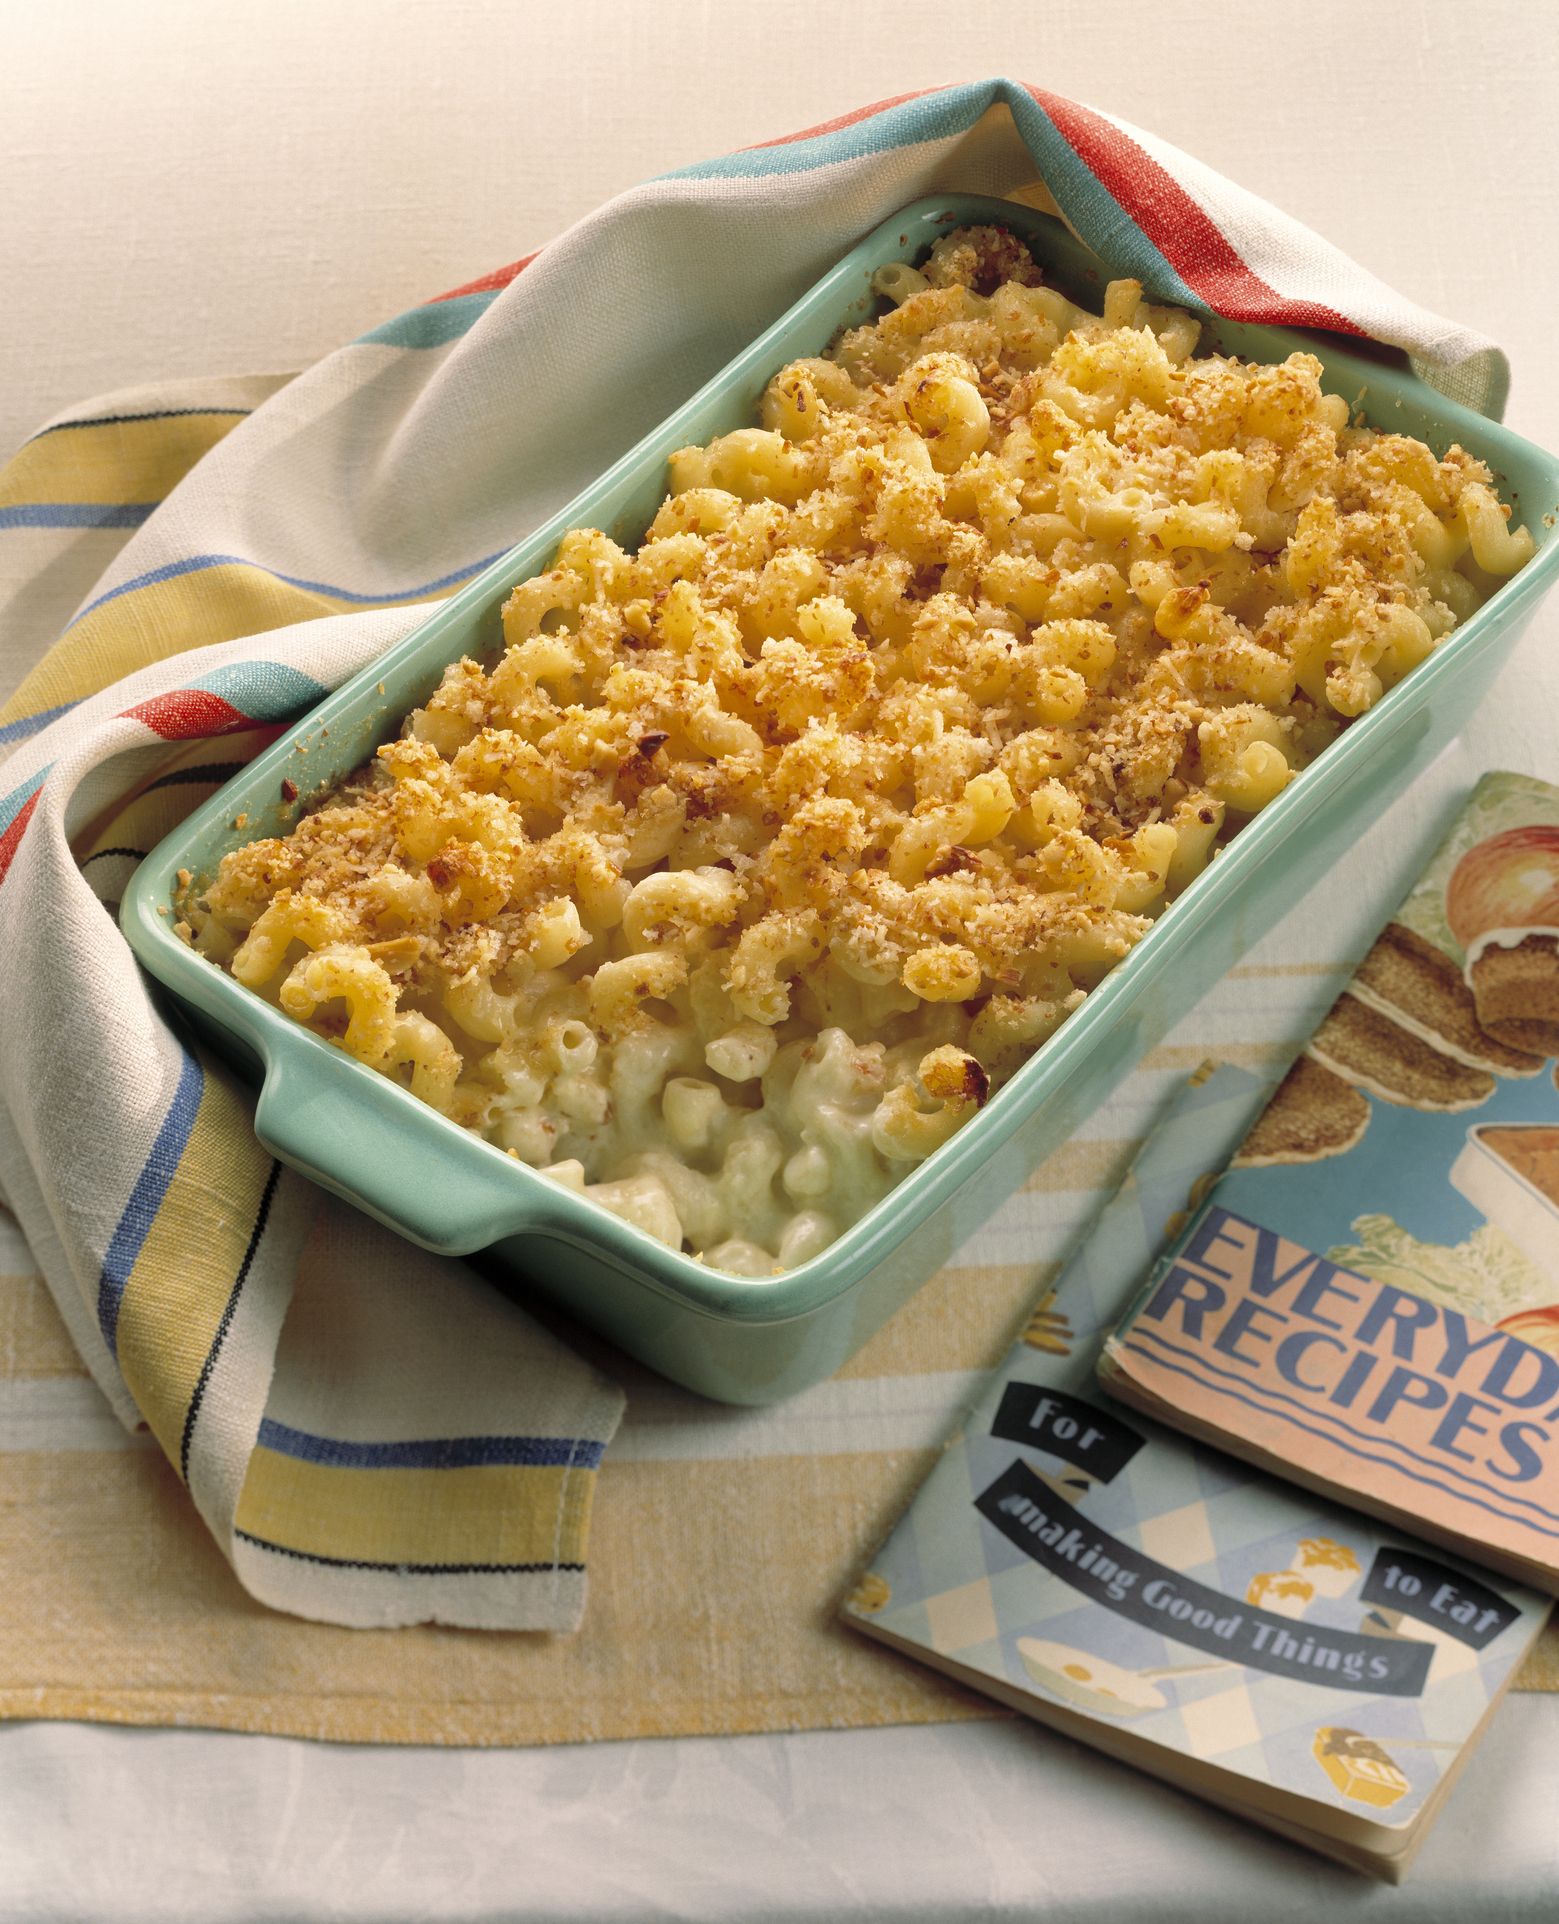 Best Mac and Cheese Recipes - Easy Recipes for Macaroni and Cheese